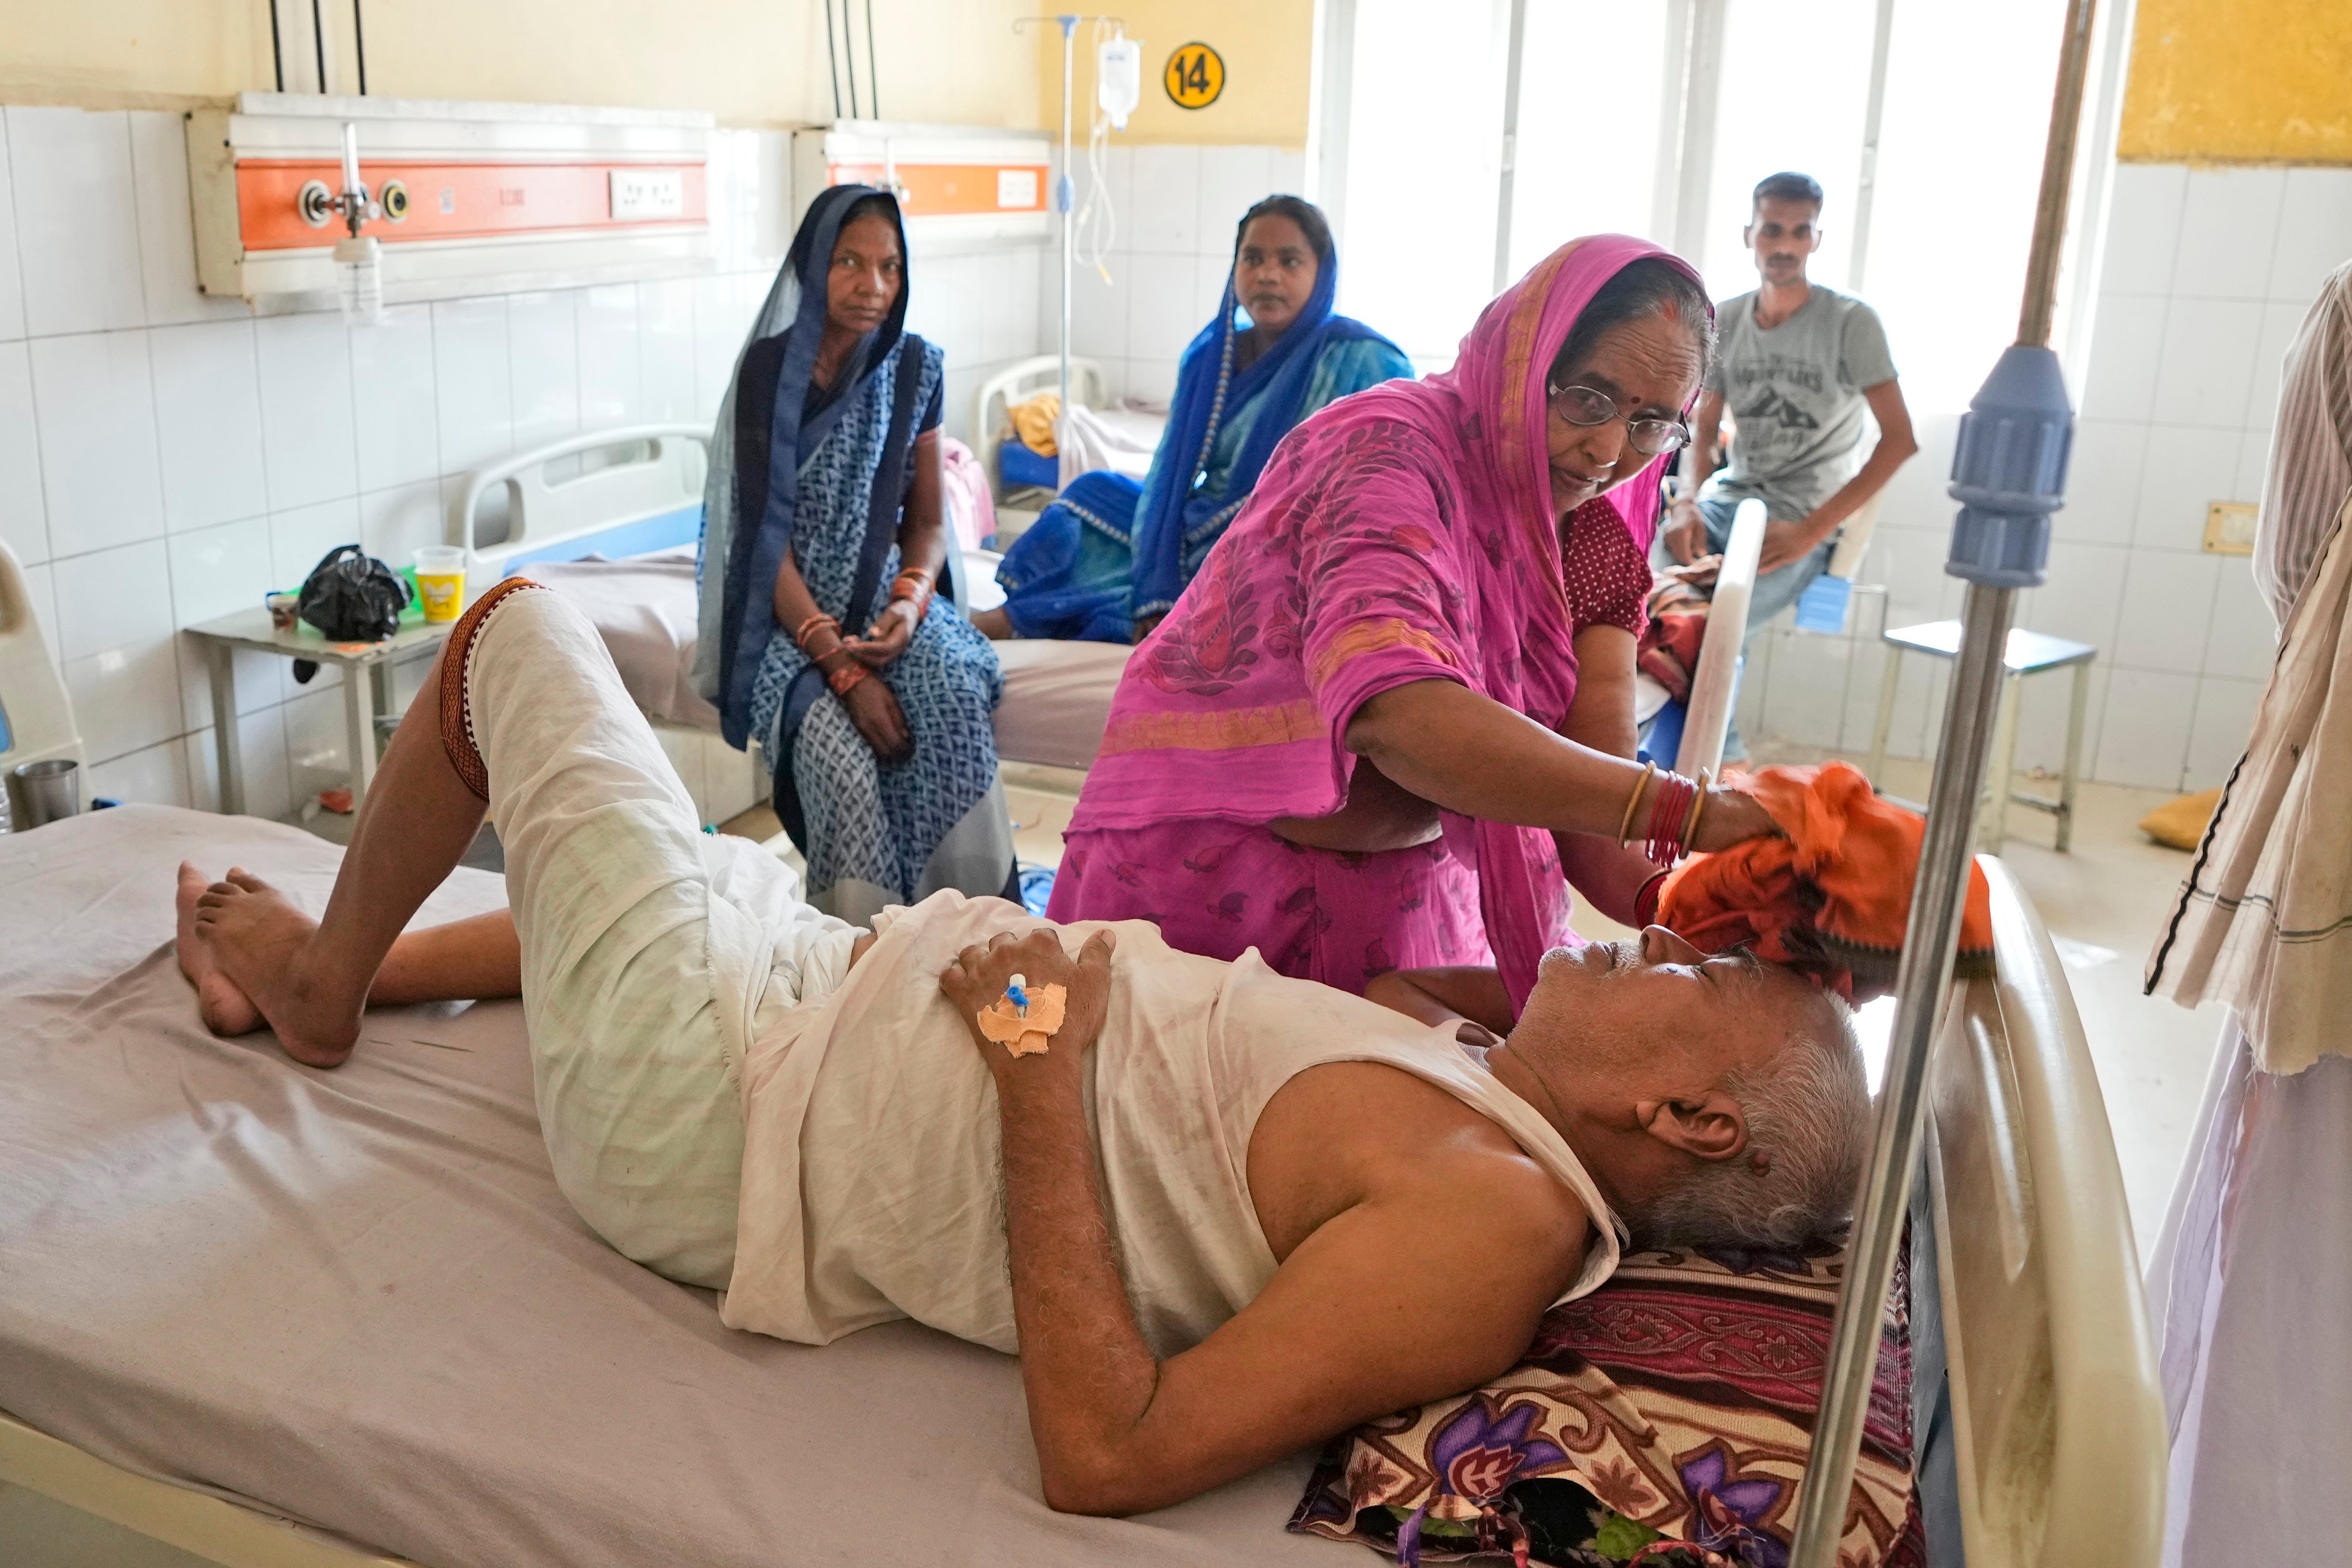 Hospitals in India were overwhelmed with patients during a searing heatwave last summer